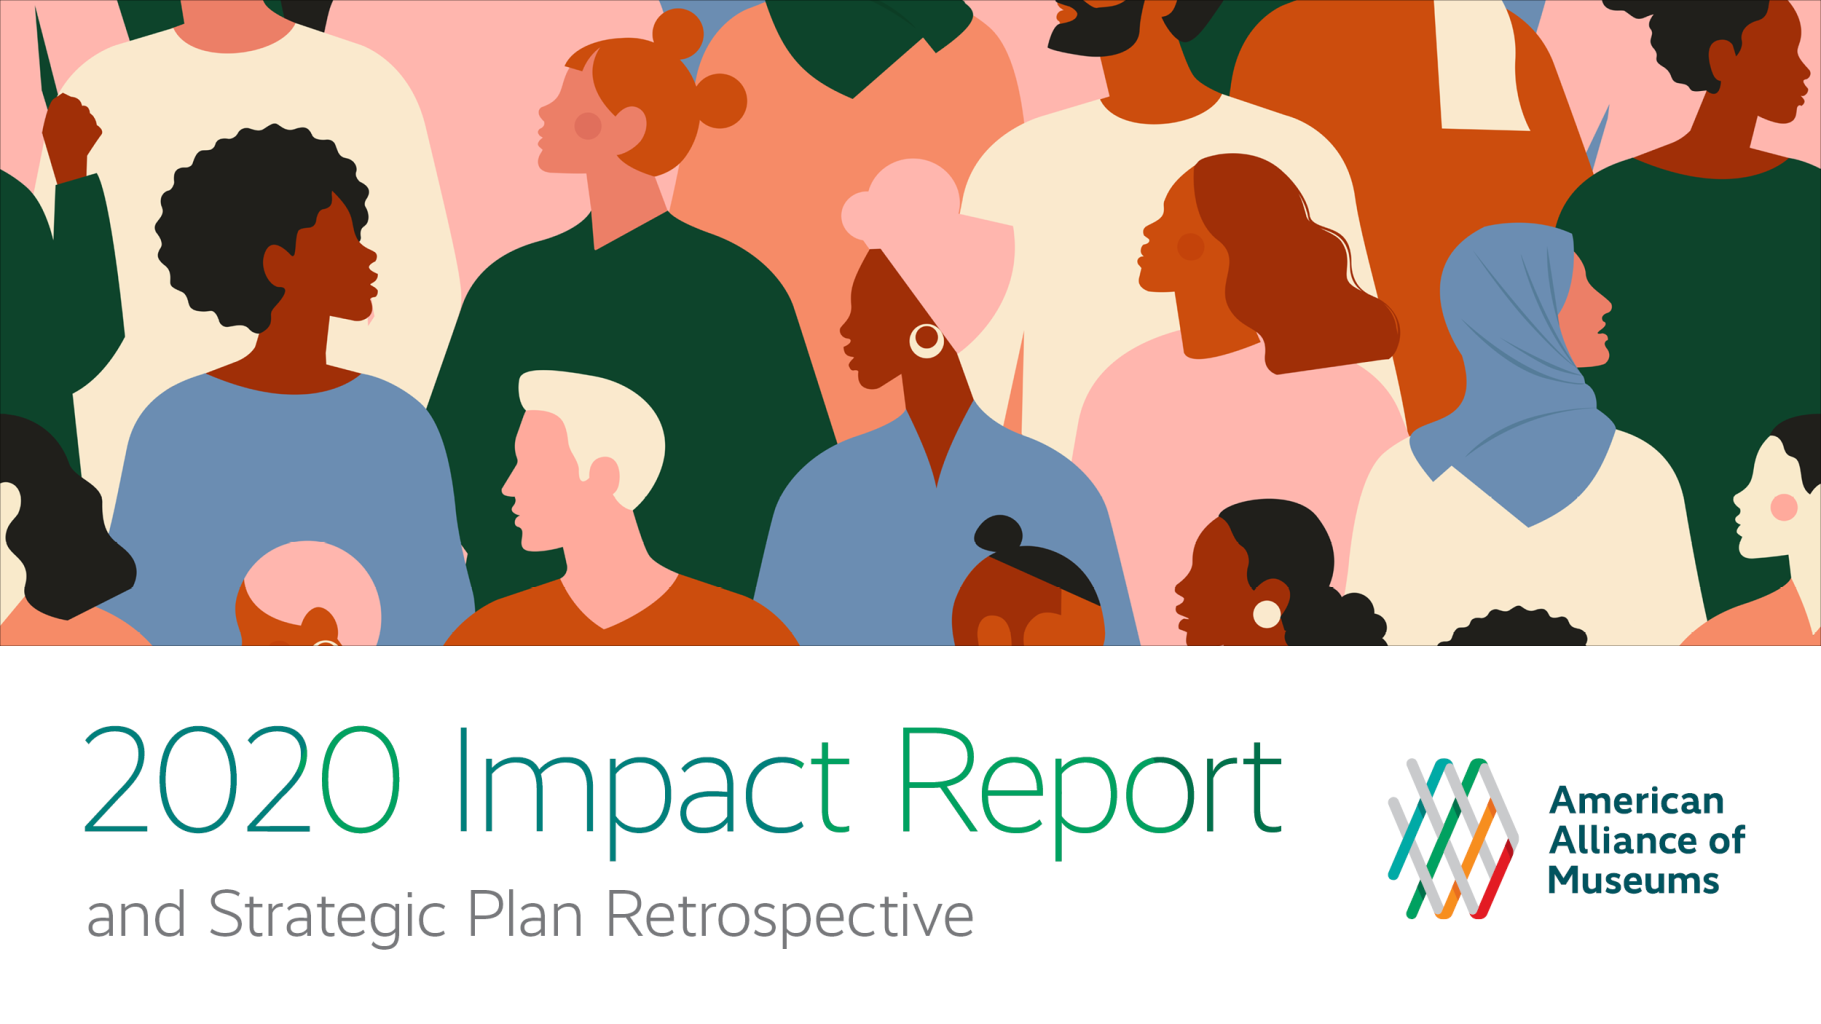 graphic of people with text that reads 2020 Impact Report and Strategic Plan Retrospective with AAM logo